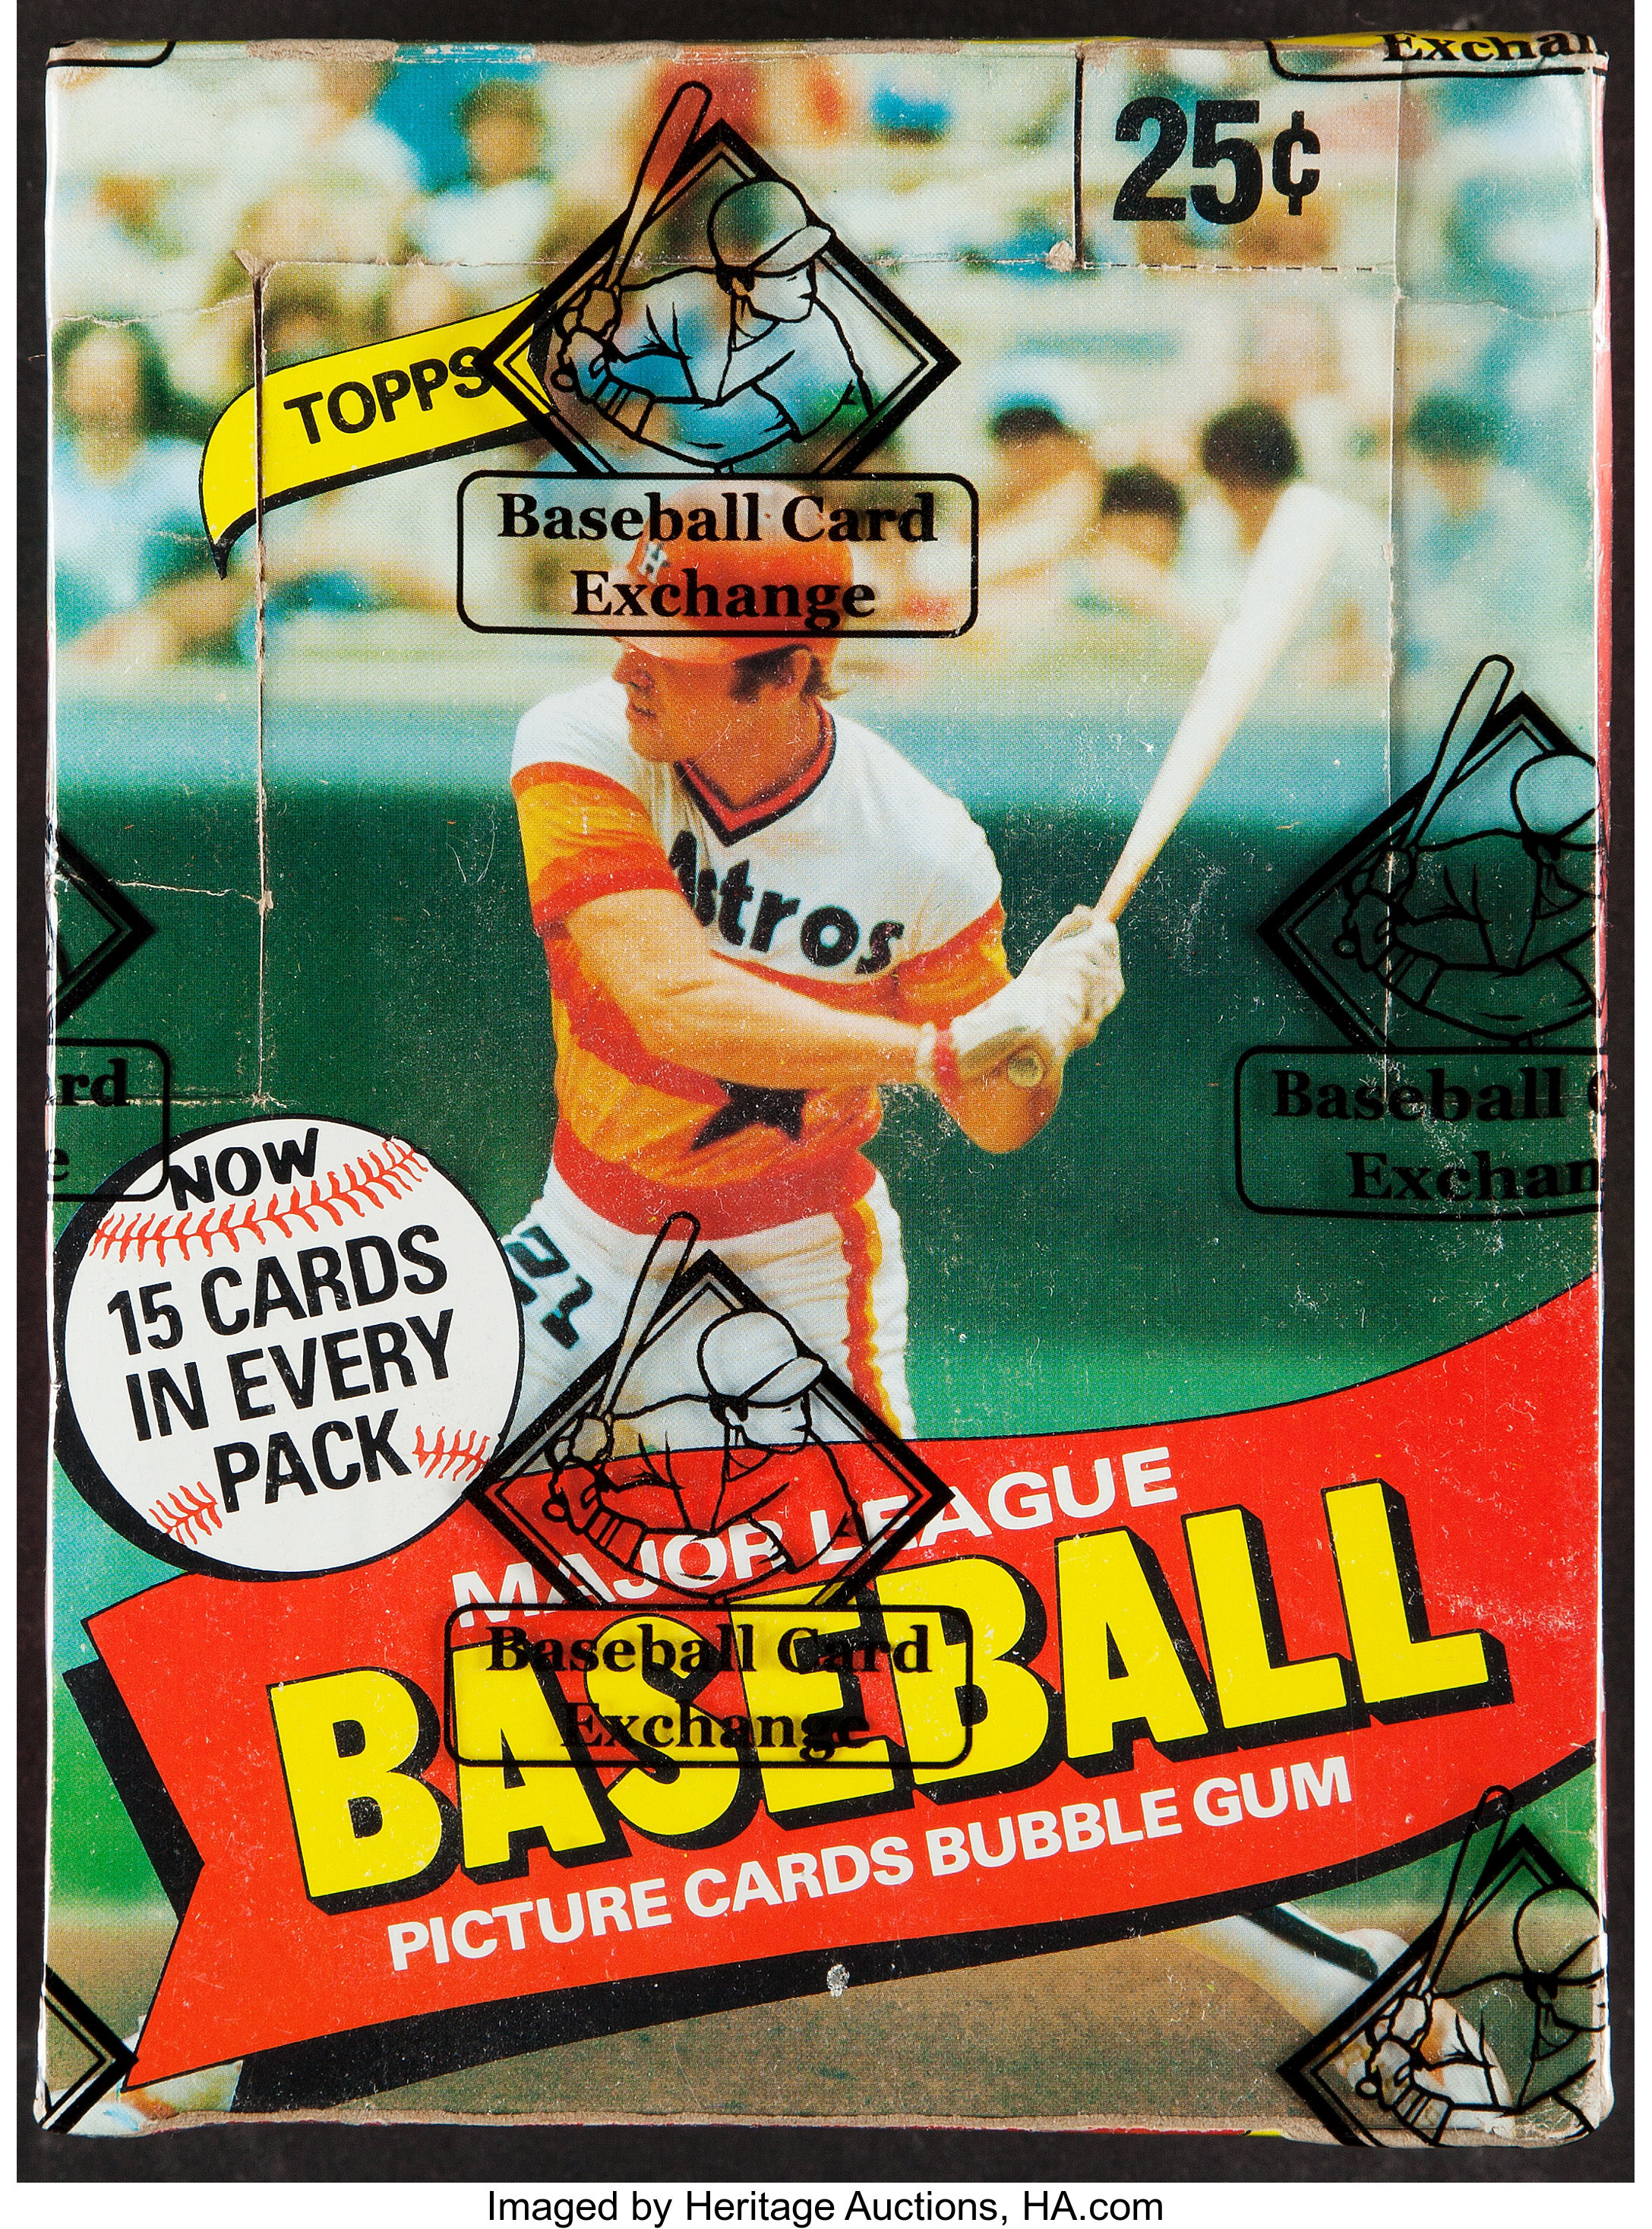 Sold at Auction: 25 Different 1977 Topps Baseball Cards w/ Boog